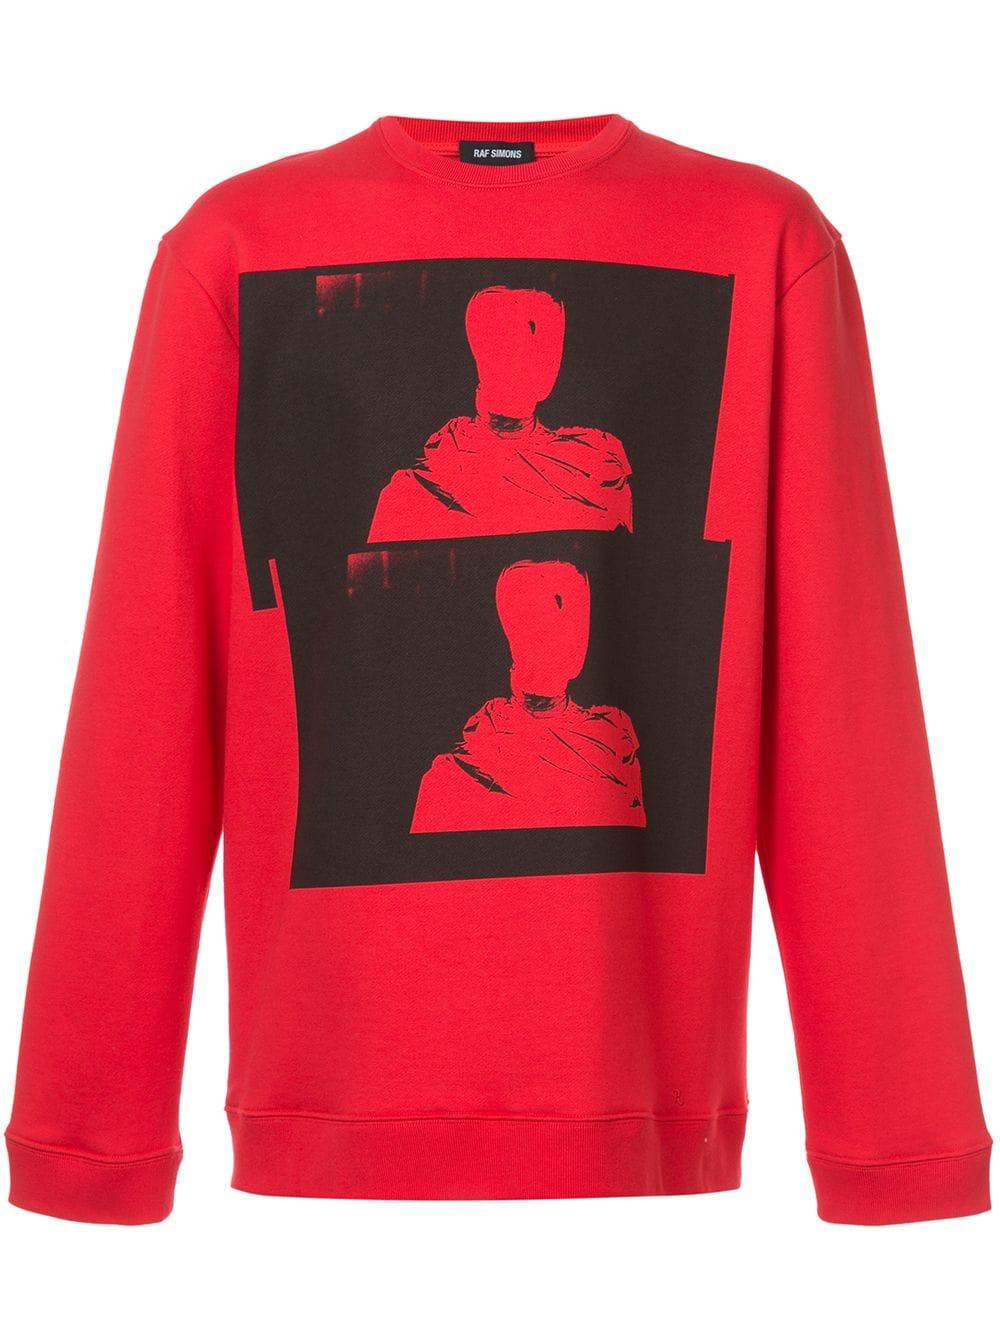 Raf Simons Cotton Long Sleeved Photographic Pullover in Red for Men - Lyst